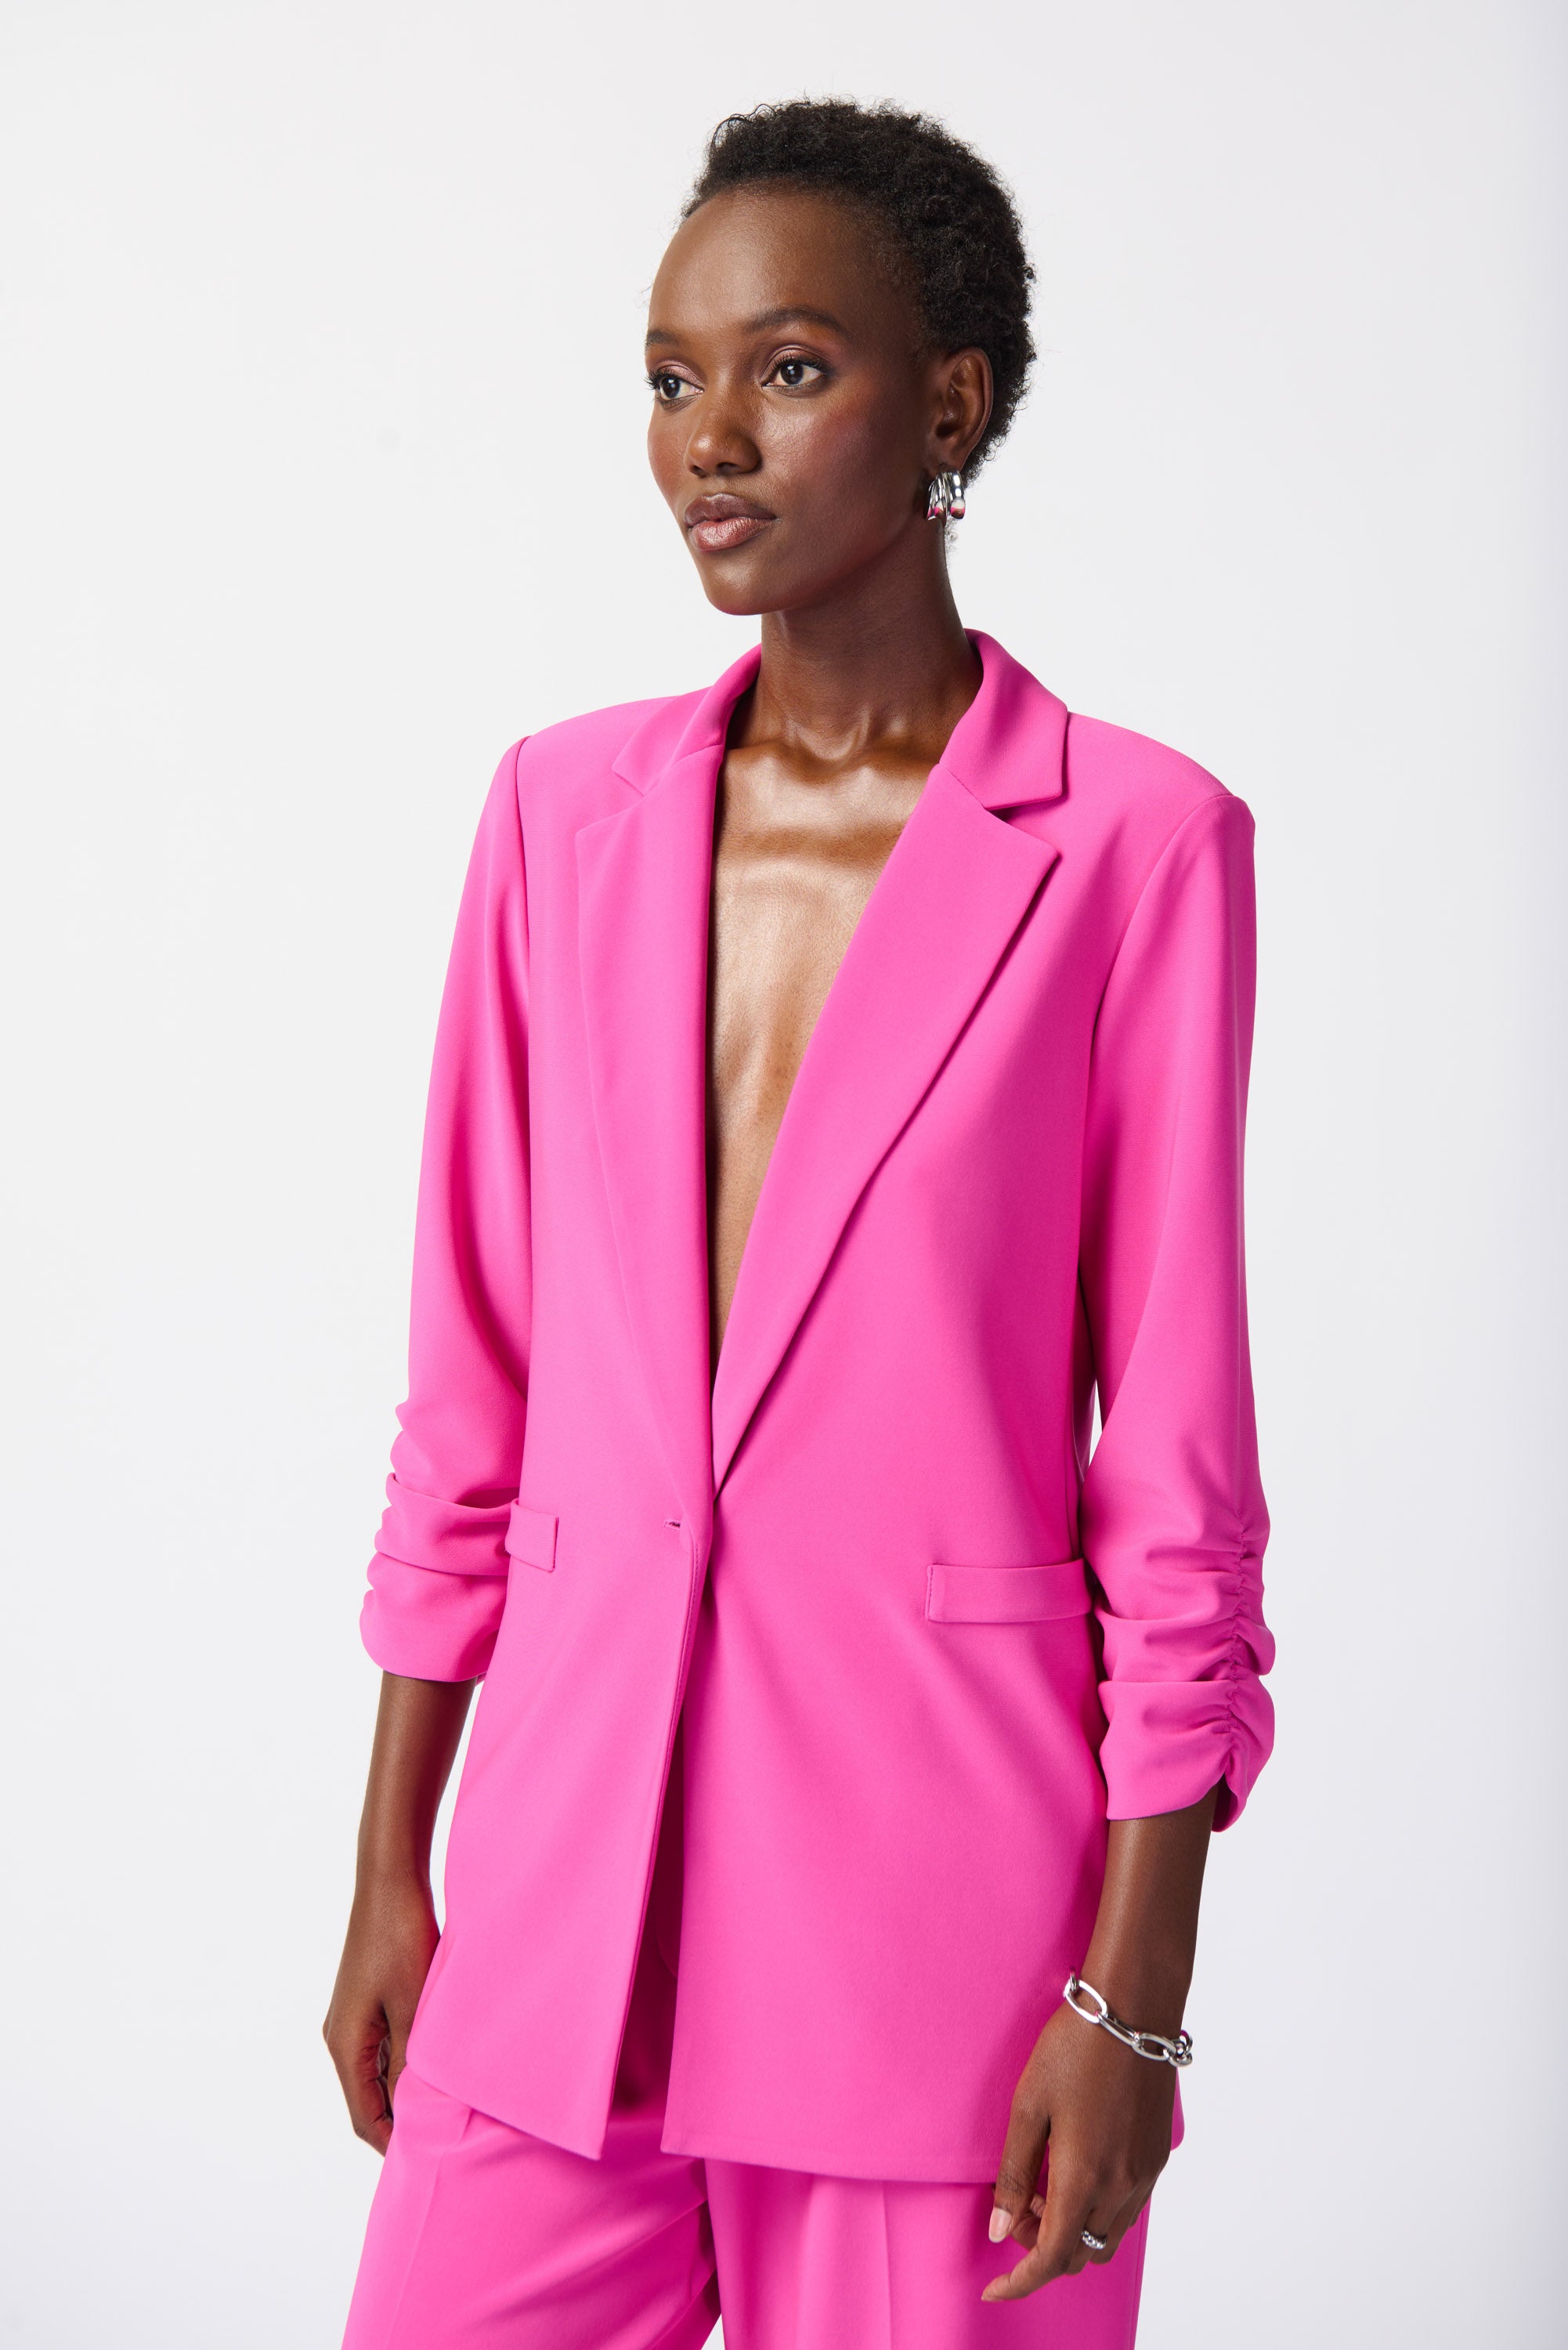 Women´s Pink Blazers, Explore our New Arrivals